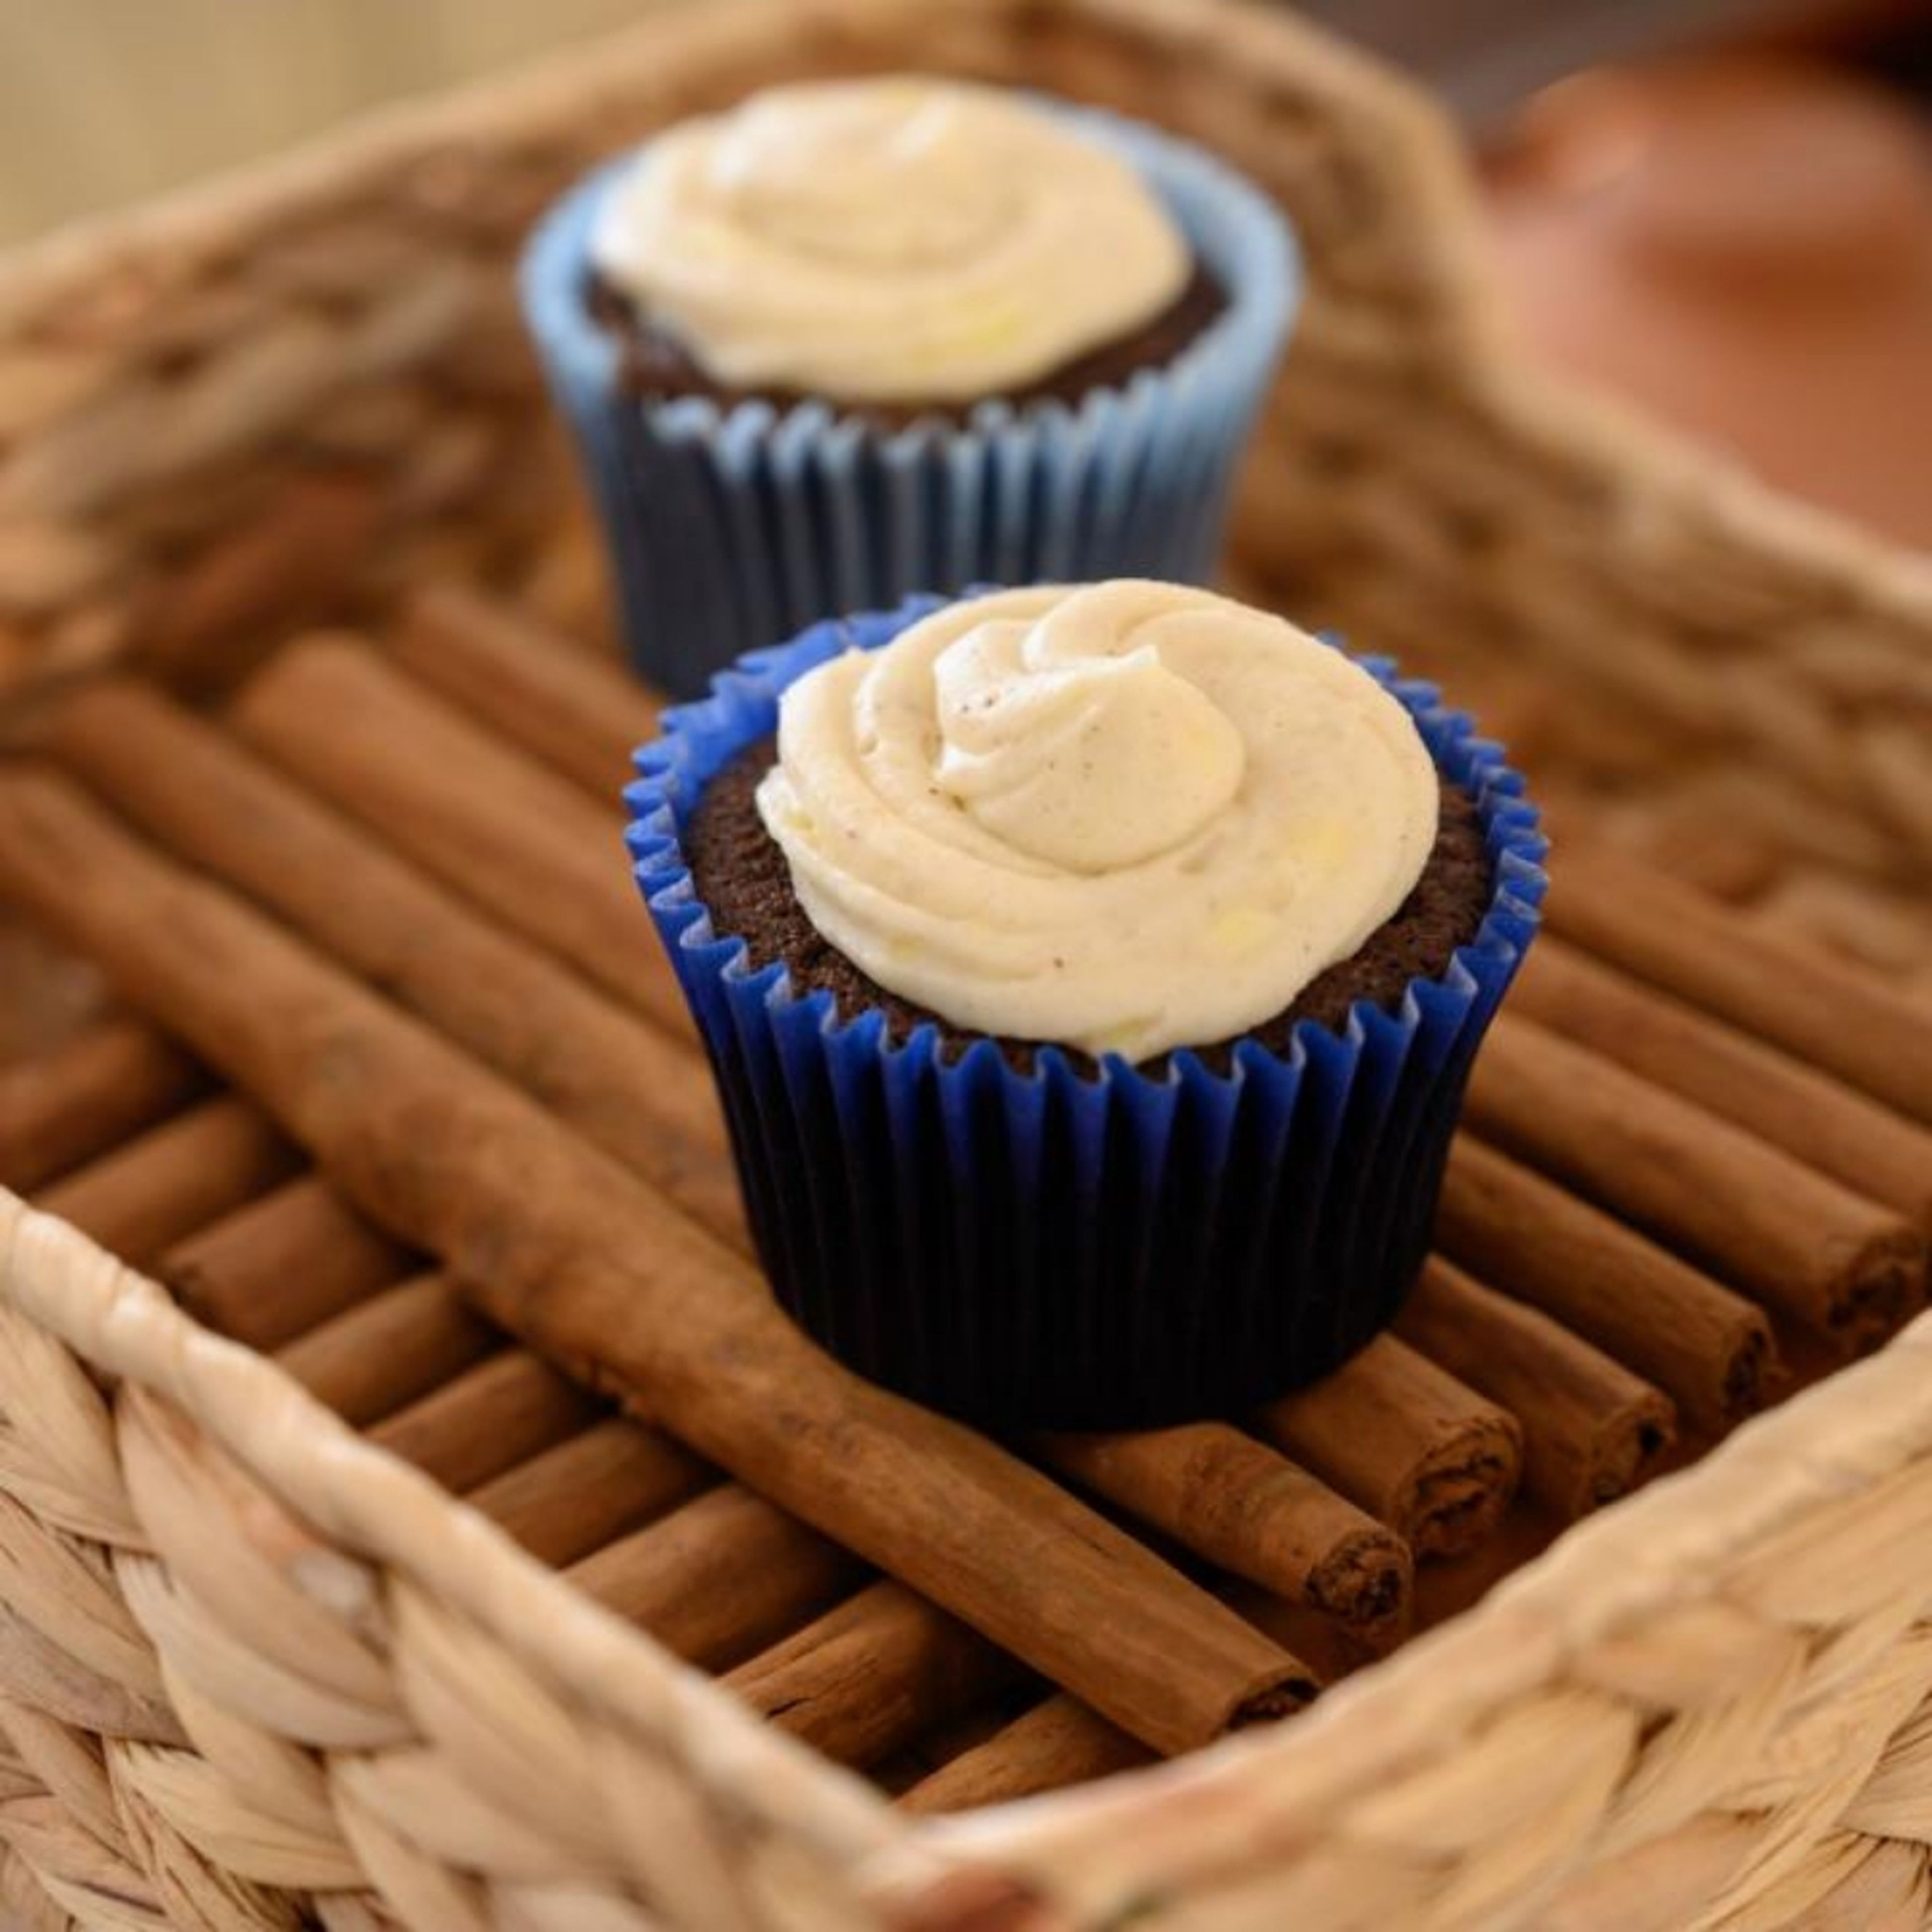 Mexican Chocolate Cupcakes with Cinnamon Frosting